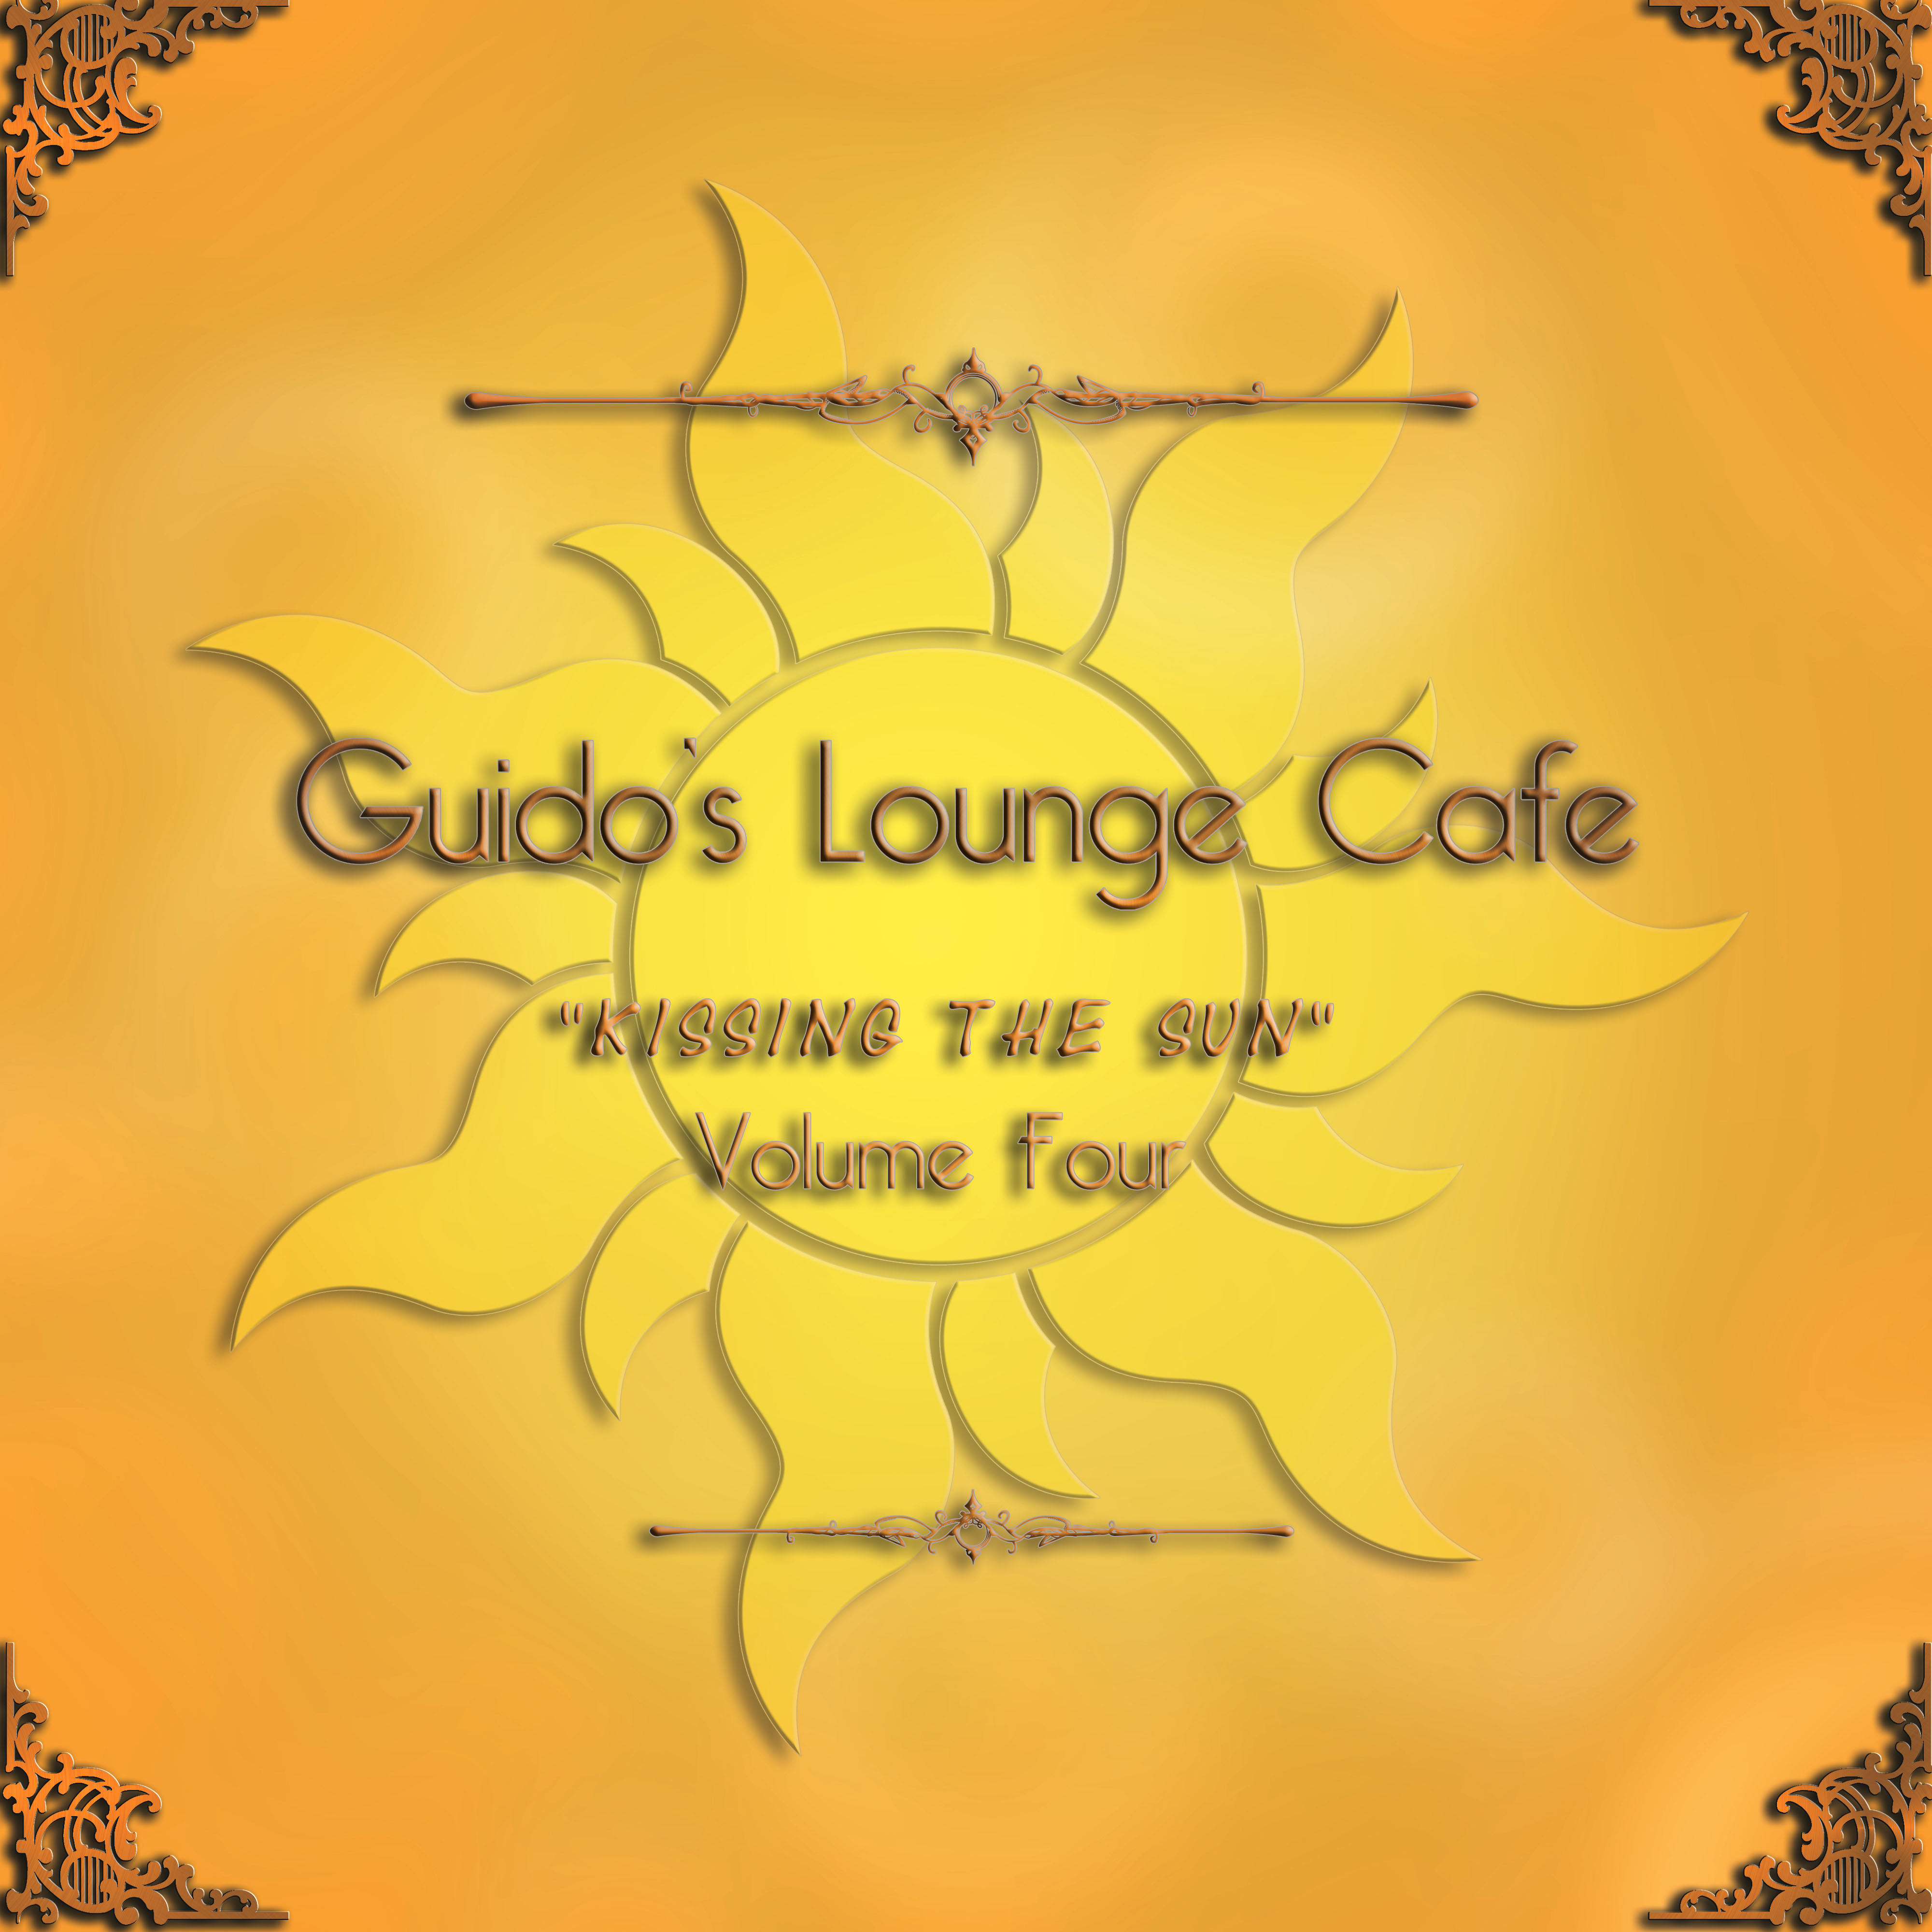 Guido's Lounge Cafe, Vol. 4 - Kissing The Sun